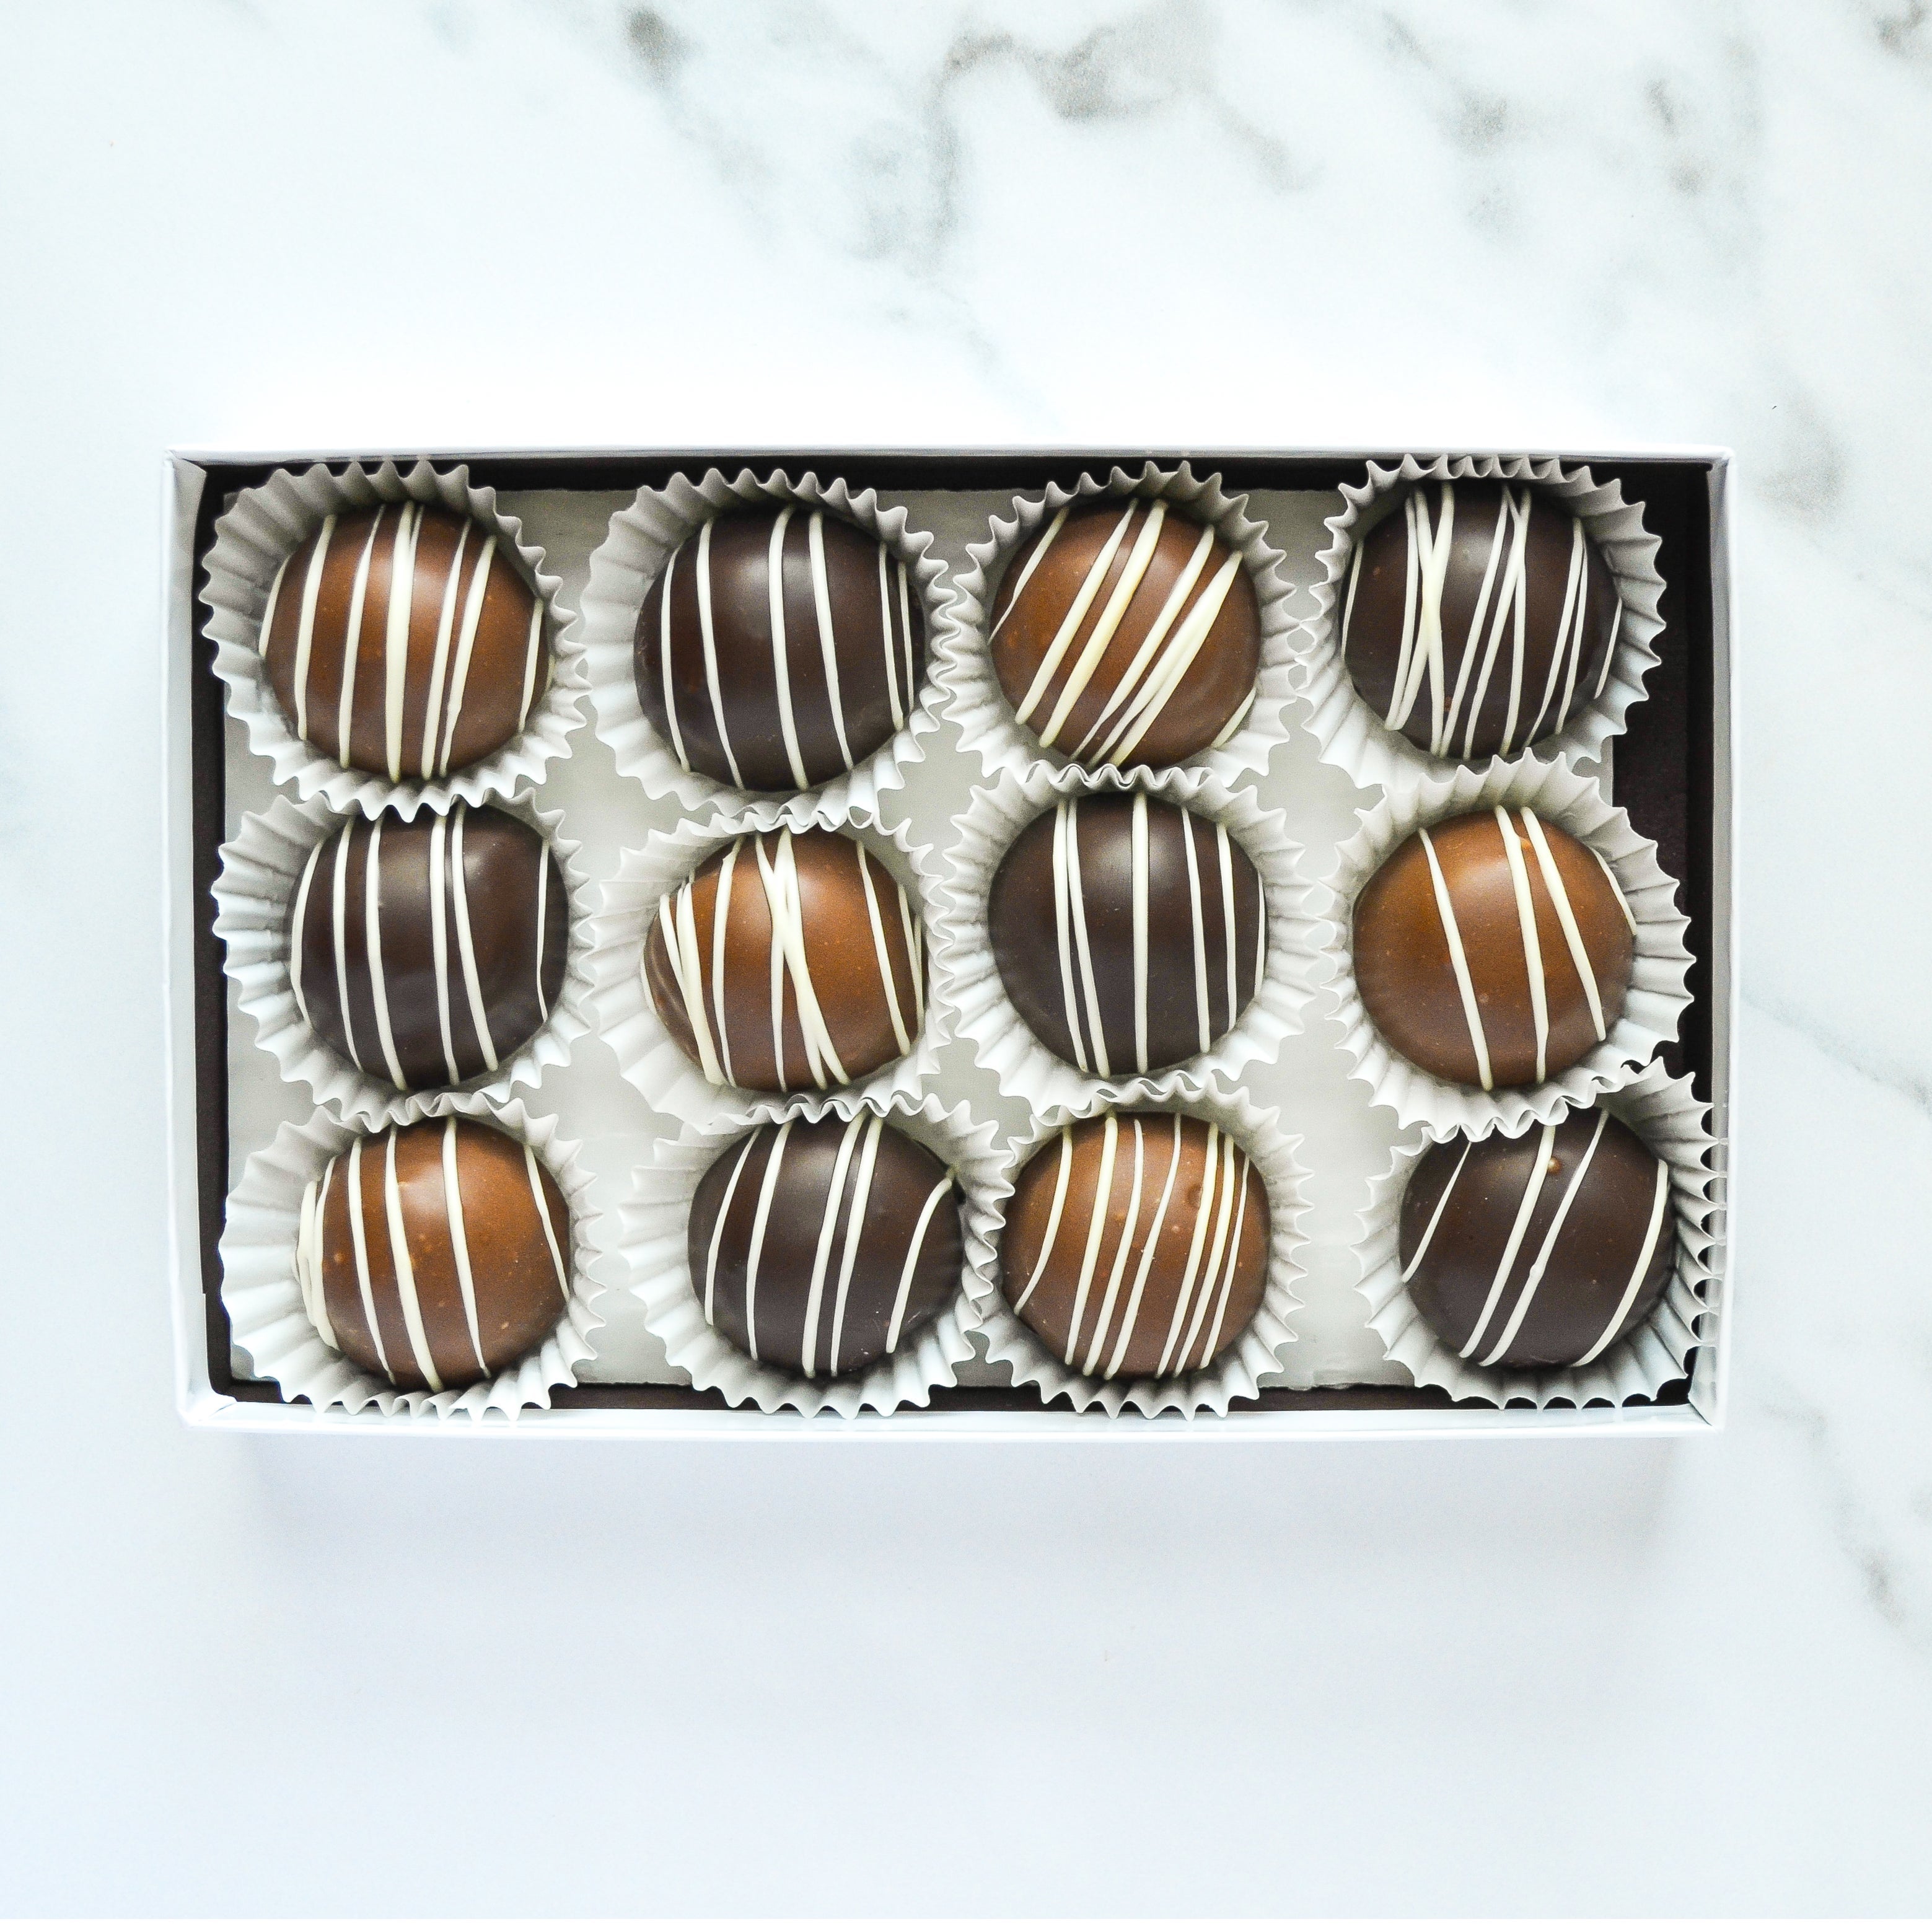 Watershed Bourbon Cherry Cordials